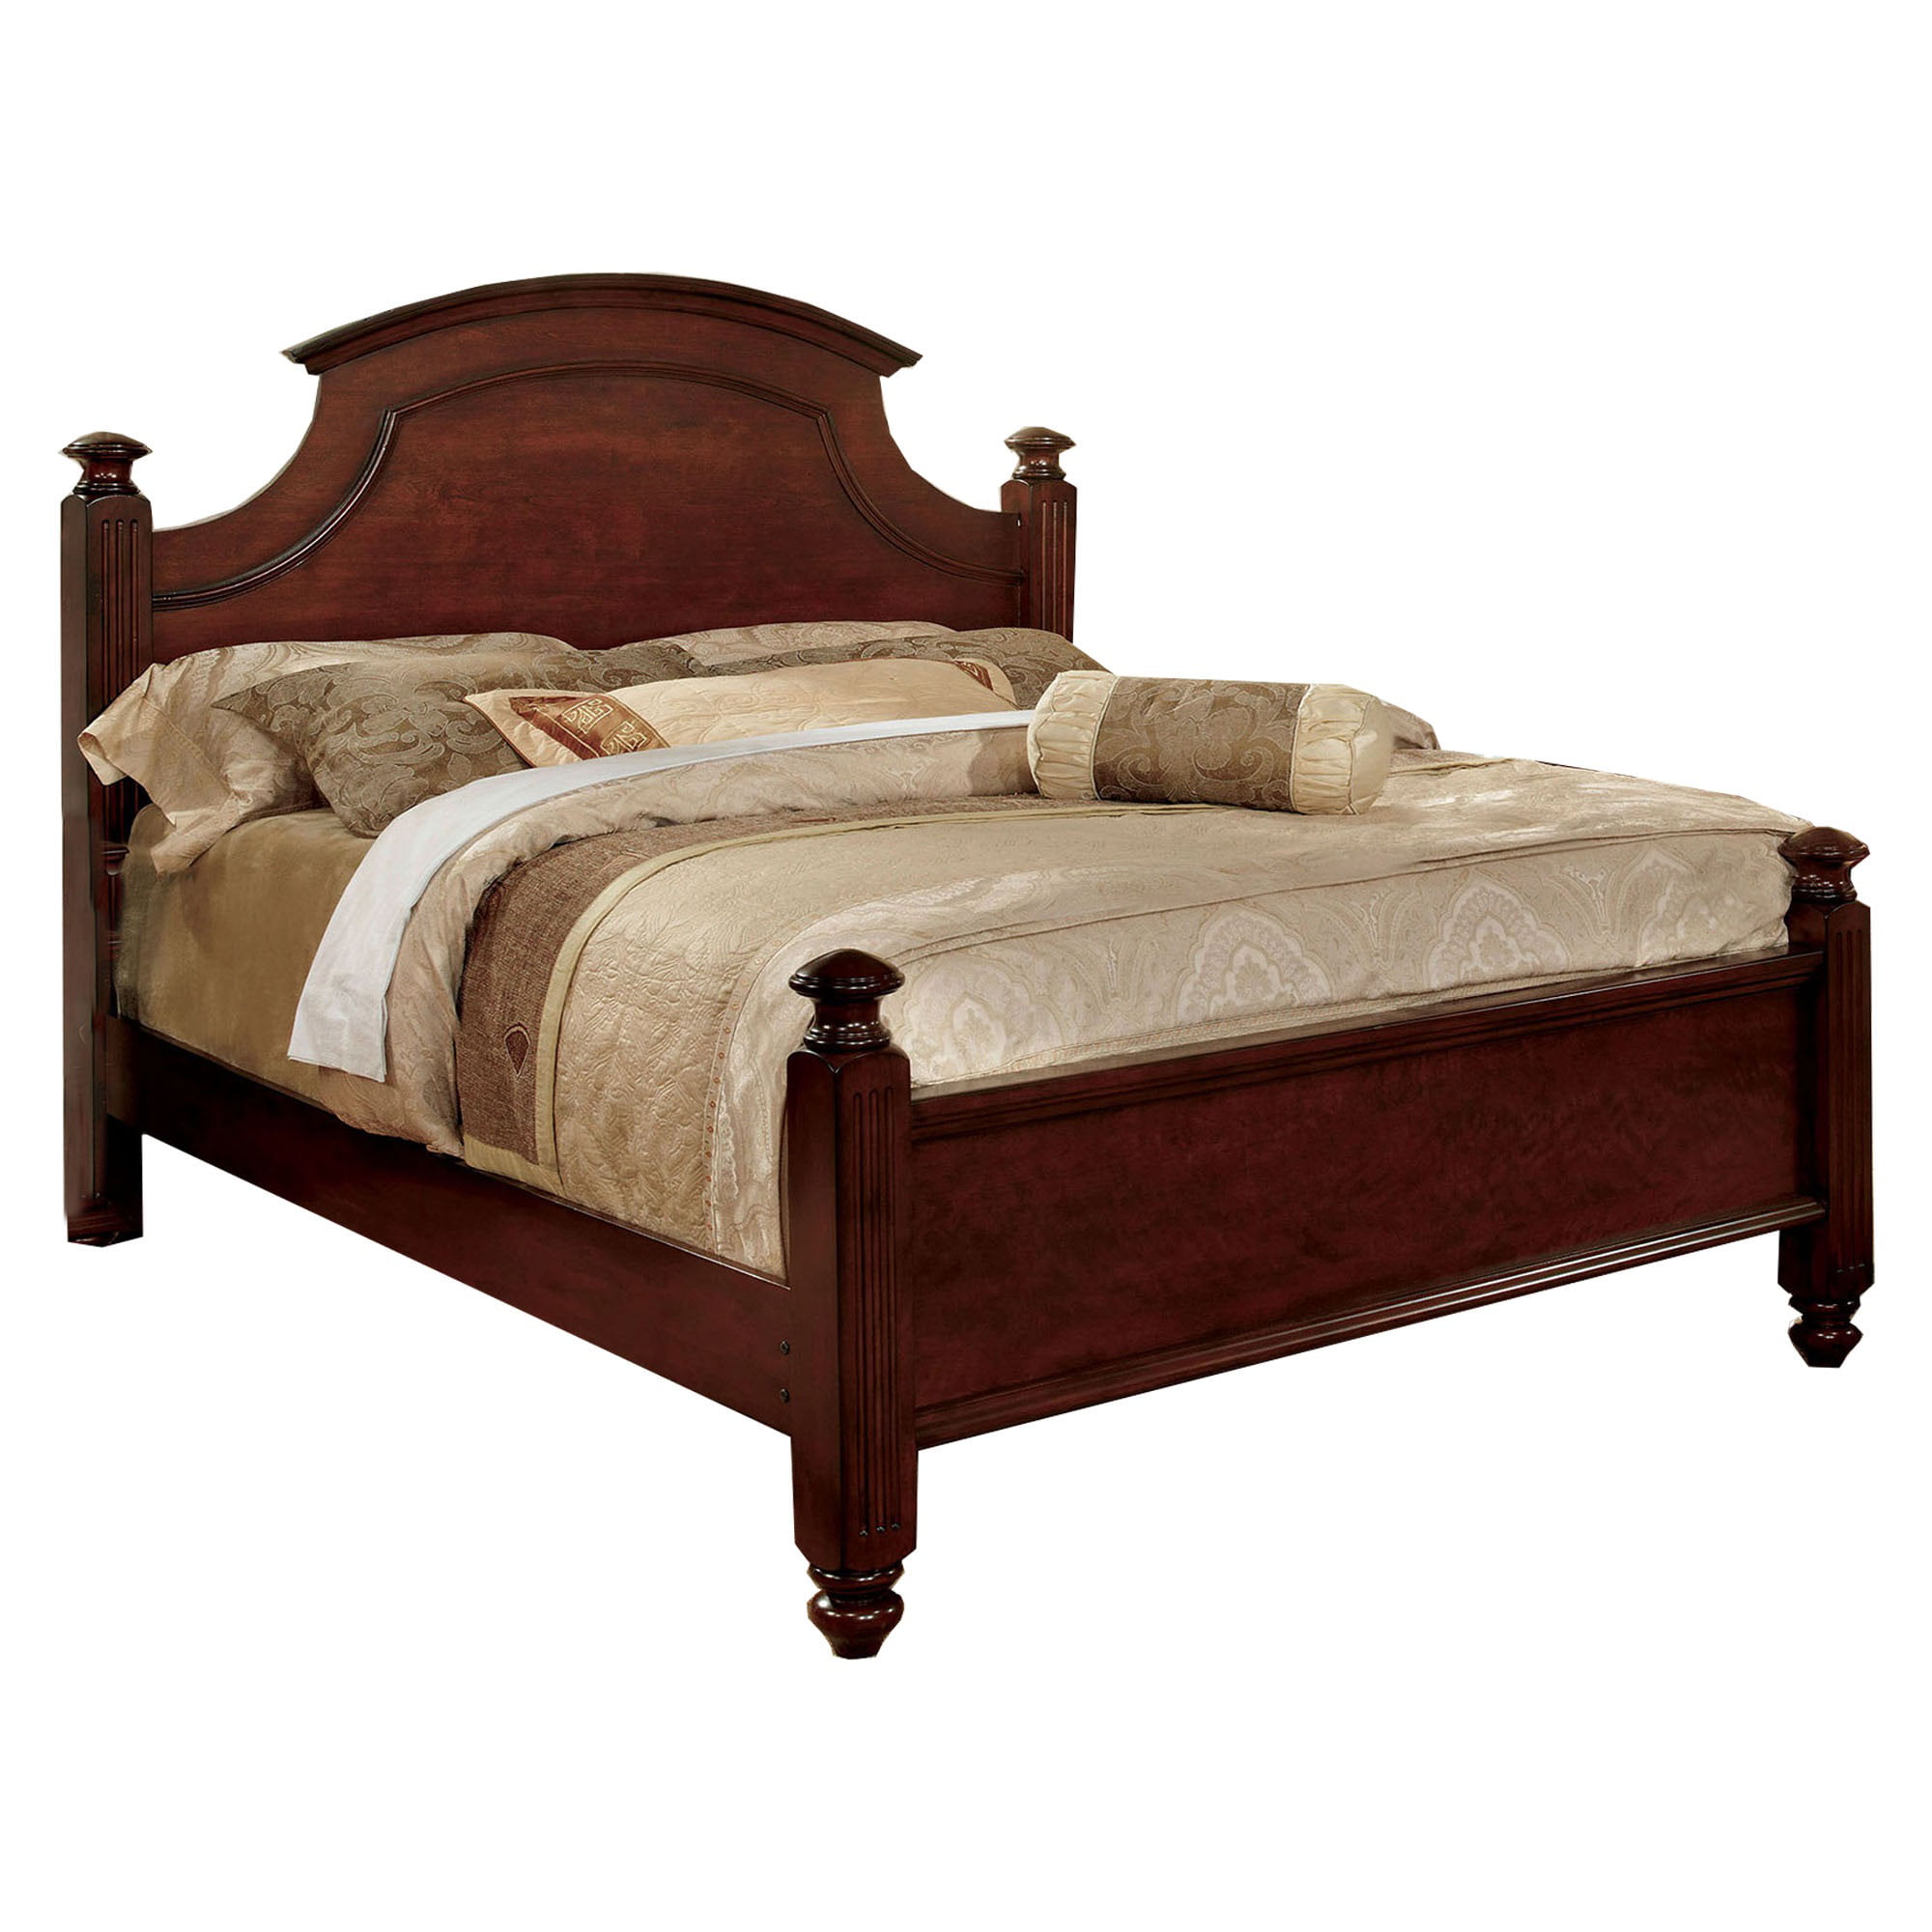 Transitional Queen Size Bed with Scalloped Headboard, Cherry Brown